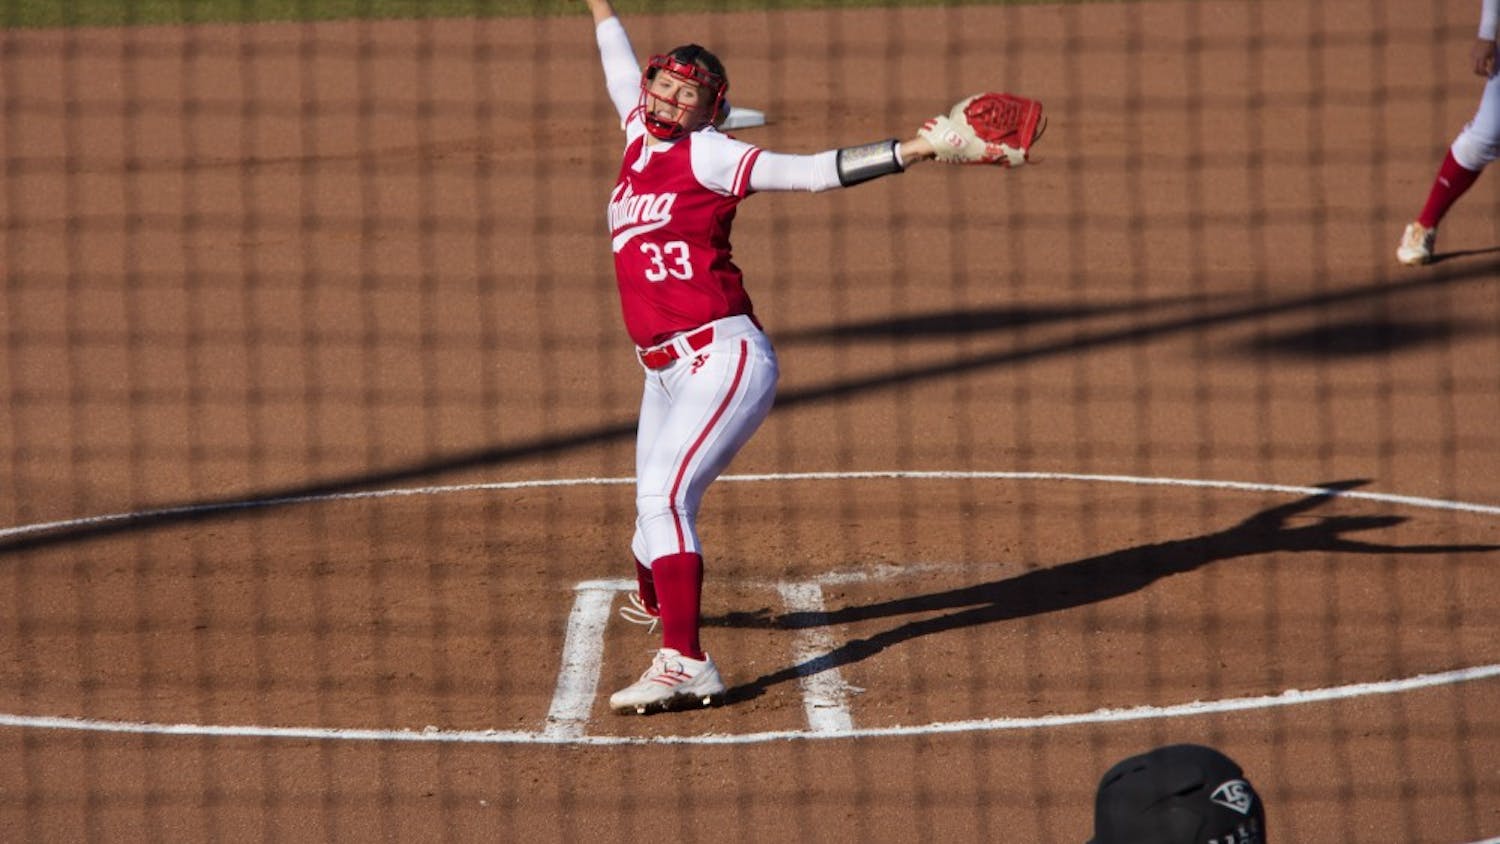 Then-freshman pitcher Tara Trainer, now a junior, throws a pitch during a 2016 game against the University of Louisville at Andy Mohr Field in Bloomington.